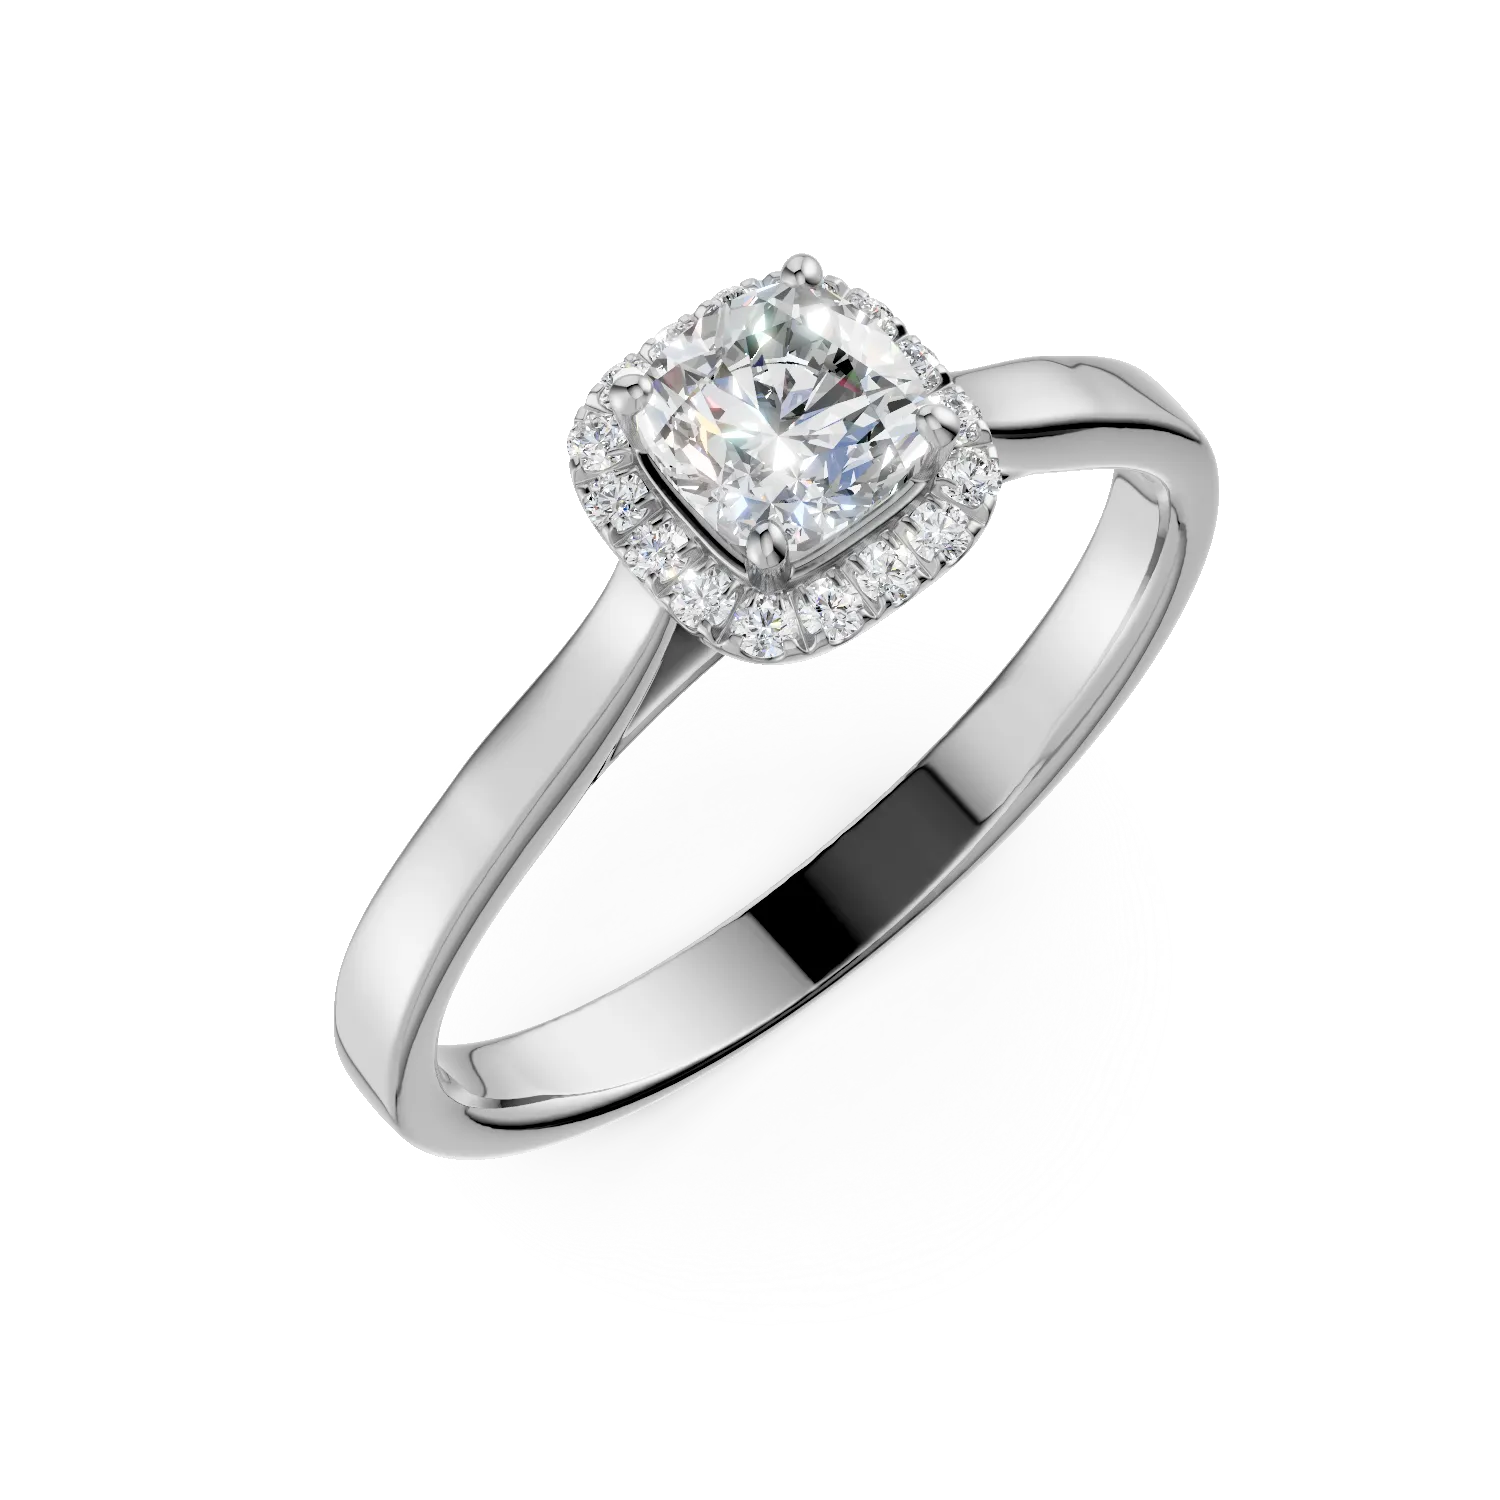 White gold engagement ring with 0.8ct diamond and 0.1ct diamonds